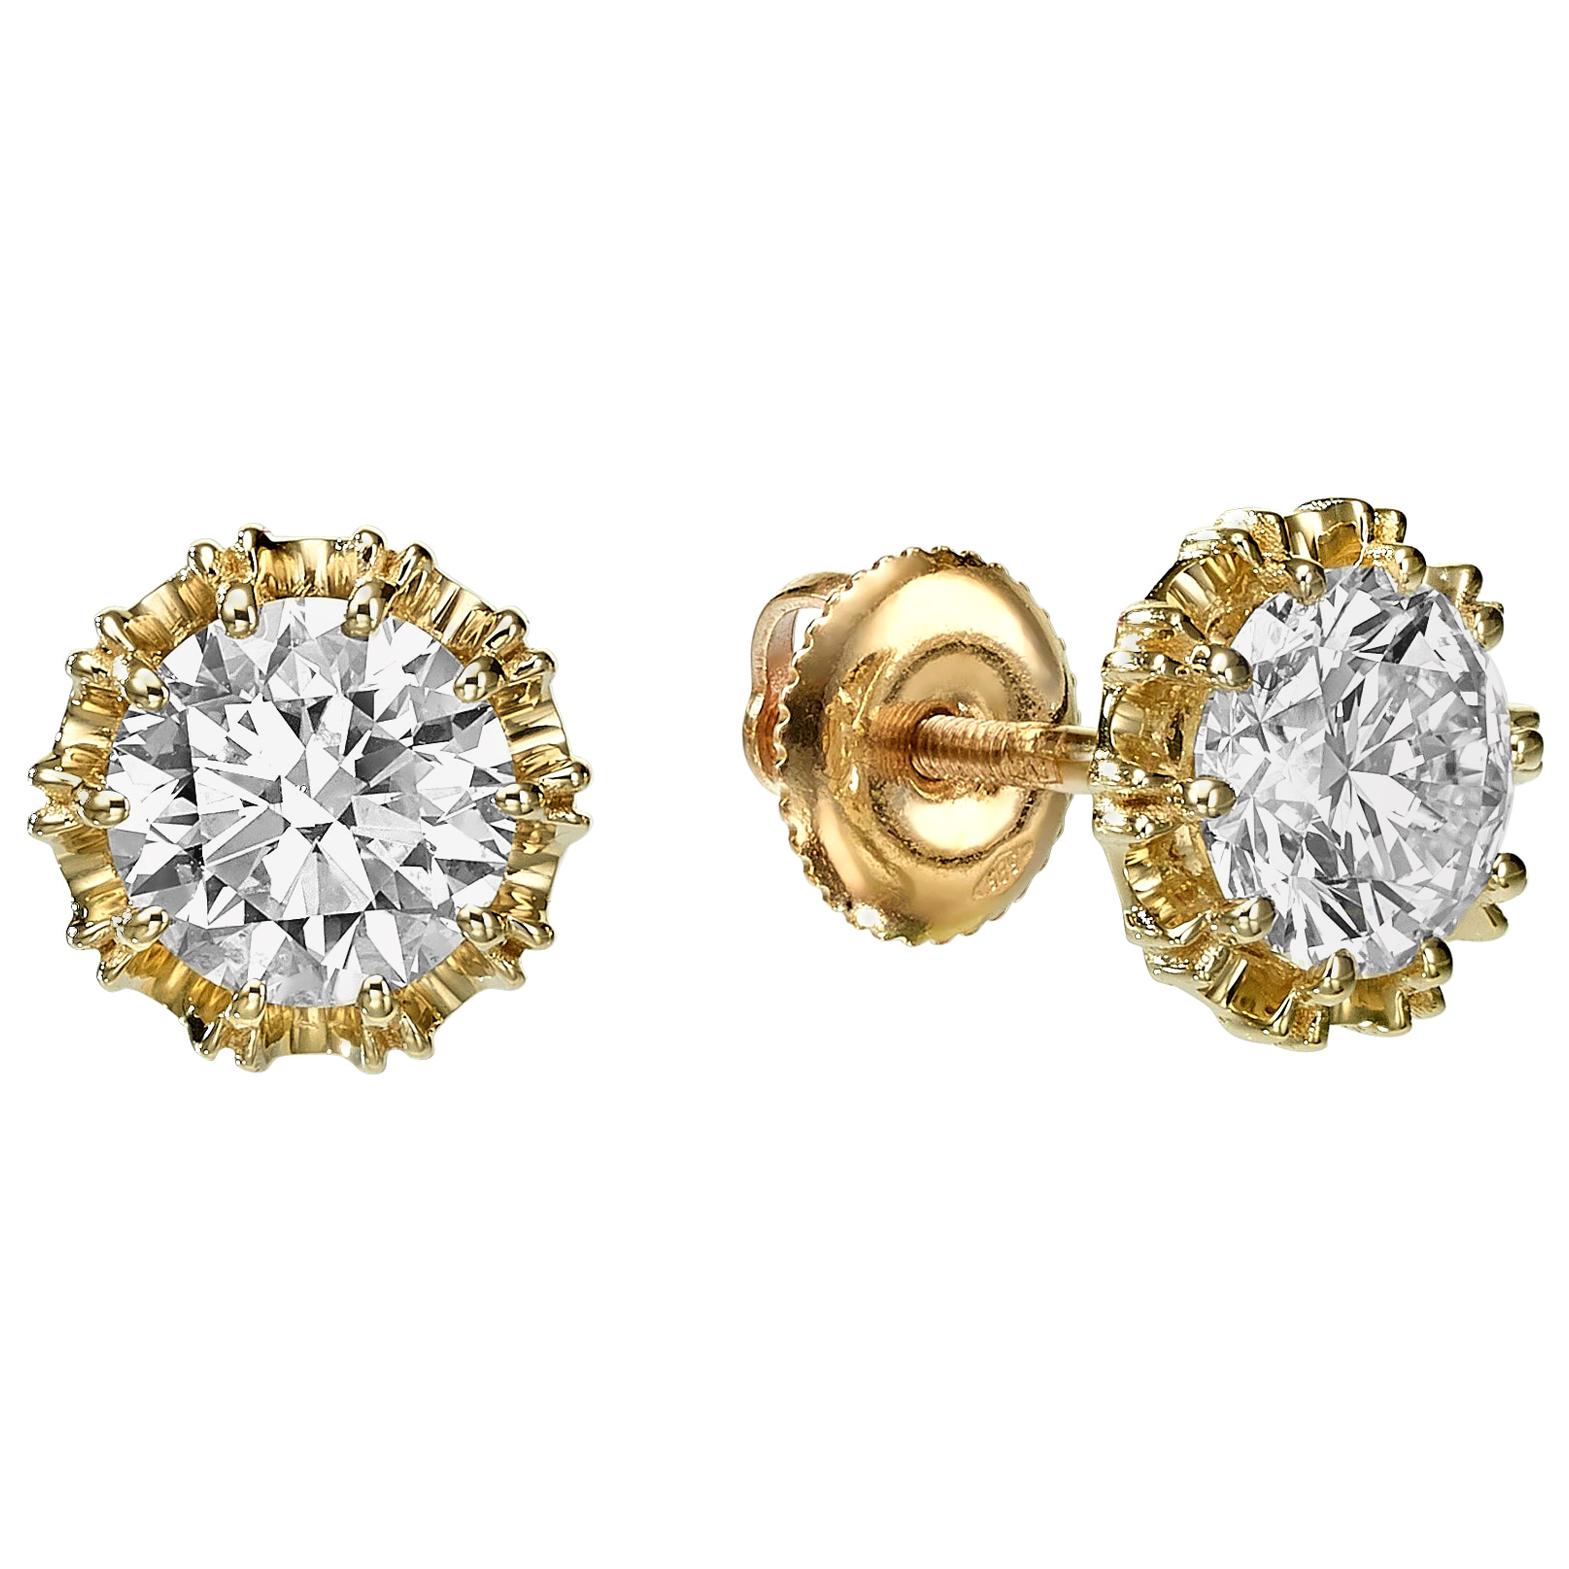 GIA Certified 2.04 Carat Diamond Stud Earrings with 18K Yellow Gold For Sale